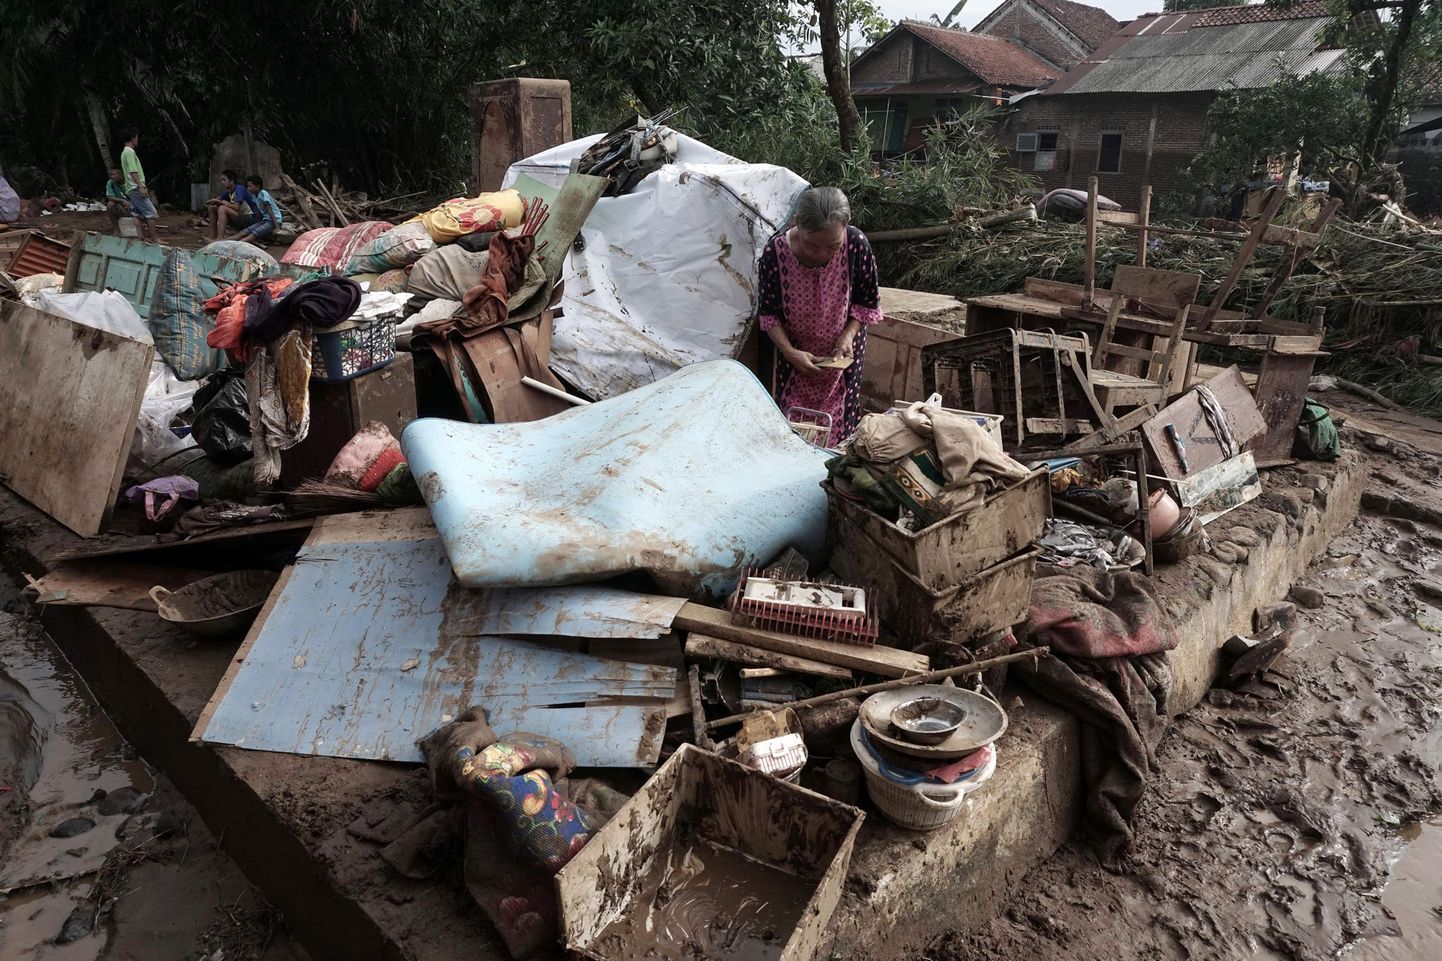 An Indonesian woman stands amid salvaged belongings after flash floods hit Kamulyan village in Banyumas, Central Java on June 19, 2016.  
Flash floods and landslides in central Indonesia have killed at least 35 people and destroyed dozens of homes, an official said June 19, as searchers scoured devastated villages for survivors. Dozens were also missing or injured following torrential rain and widespread flooding on the main island of Java, where thousands of homes have been swamped.
 / AFP PHOTO / ROHMAT SYARIF